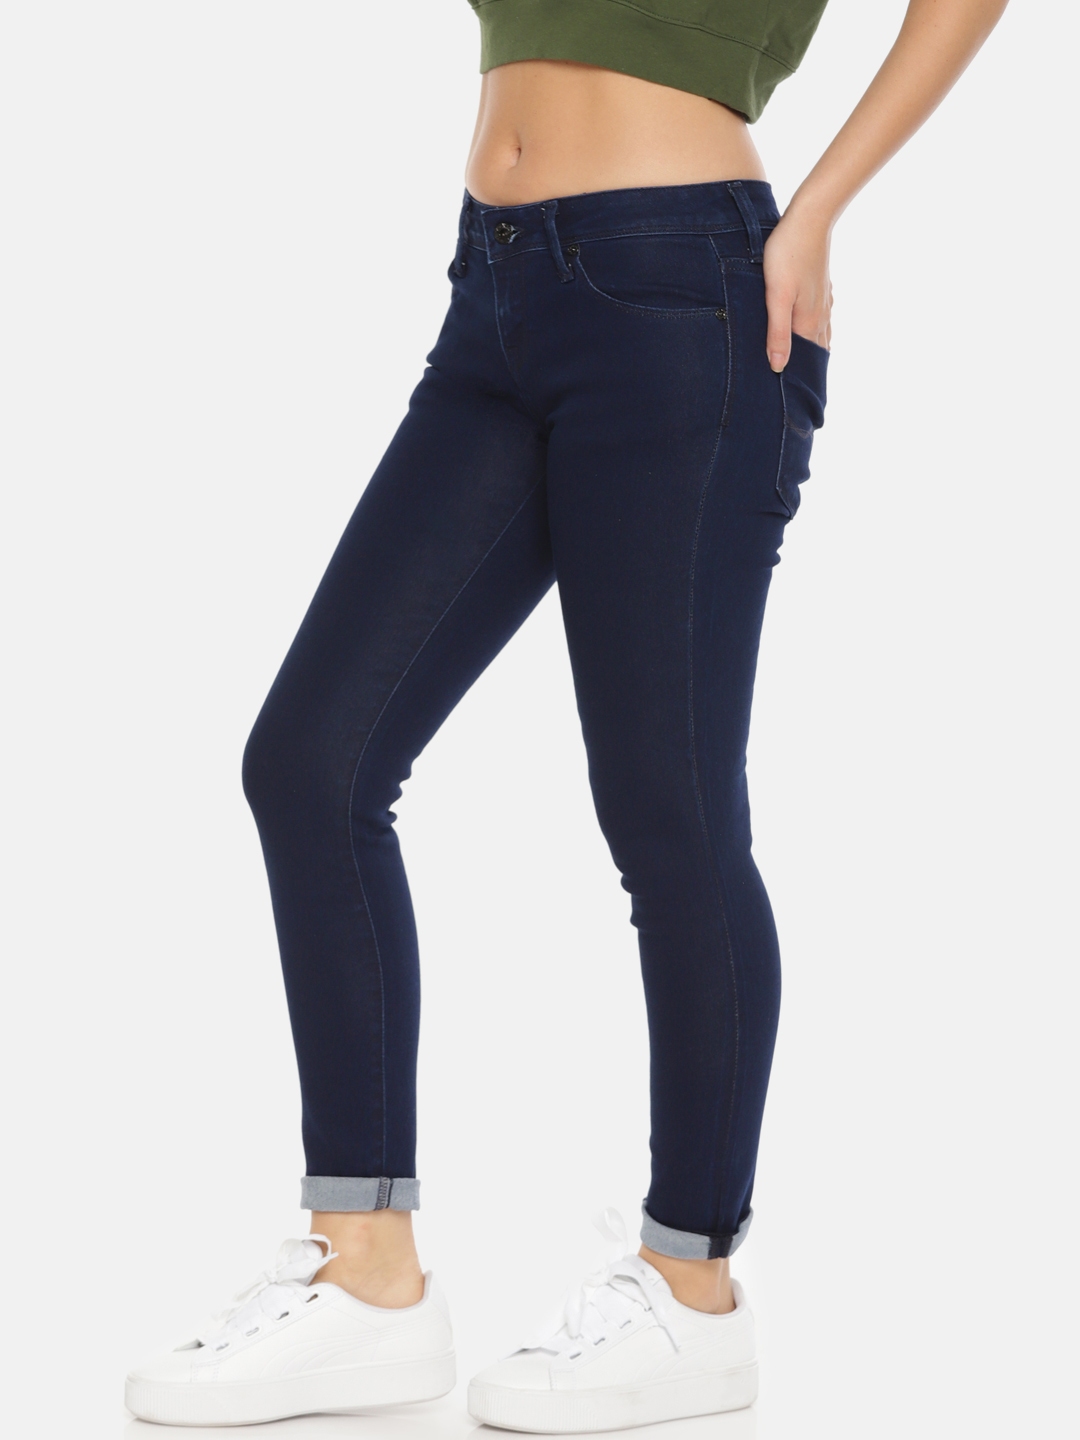 jegging jeans for ladies